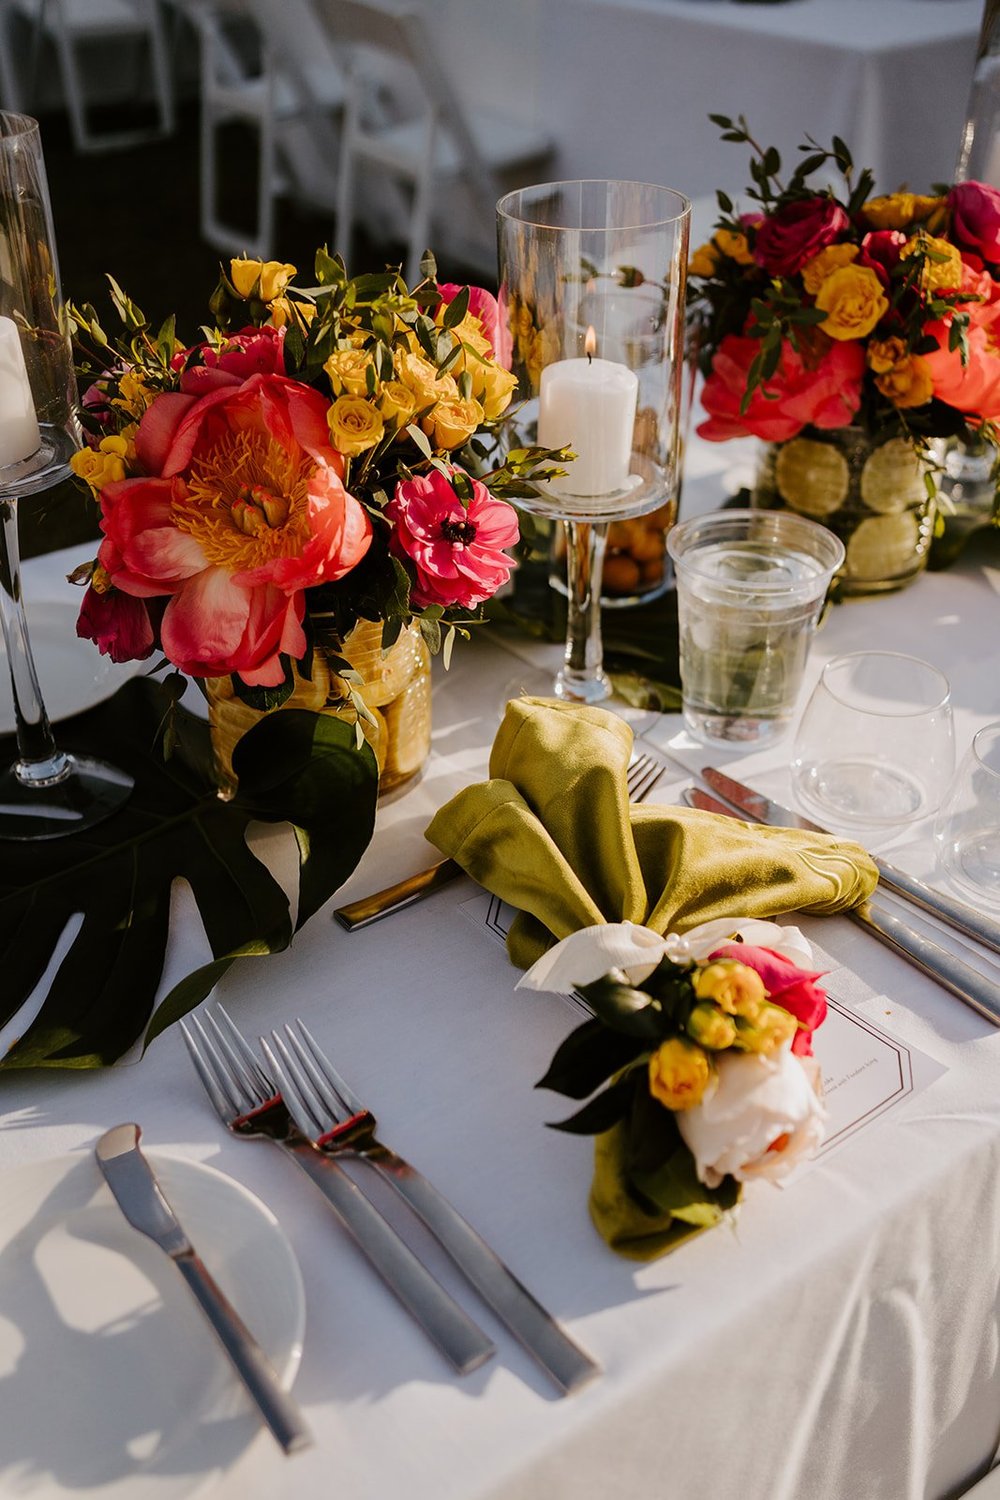 Bright pink and orange wedding table centerpiece, La Quinta Resort Wedding in Palm Springs | Photo by Tida Svy